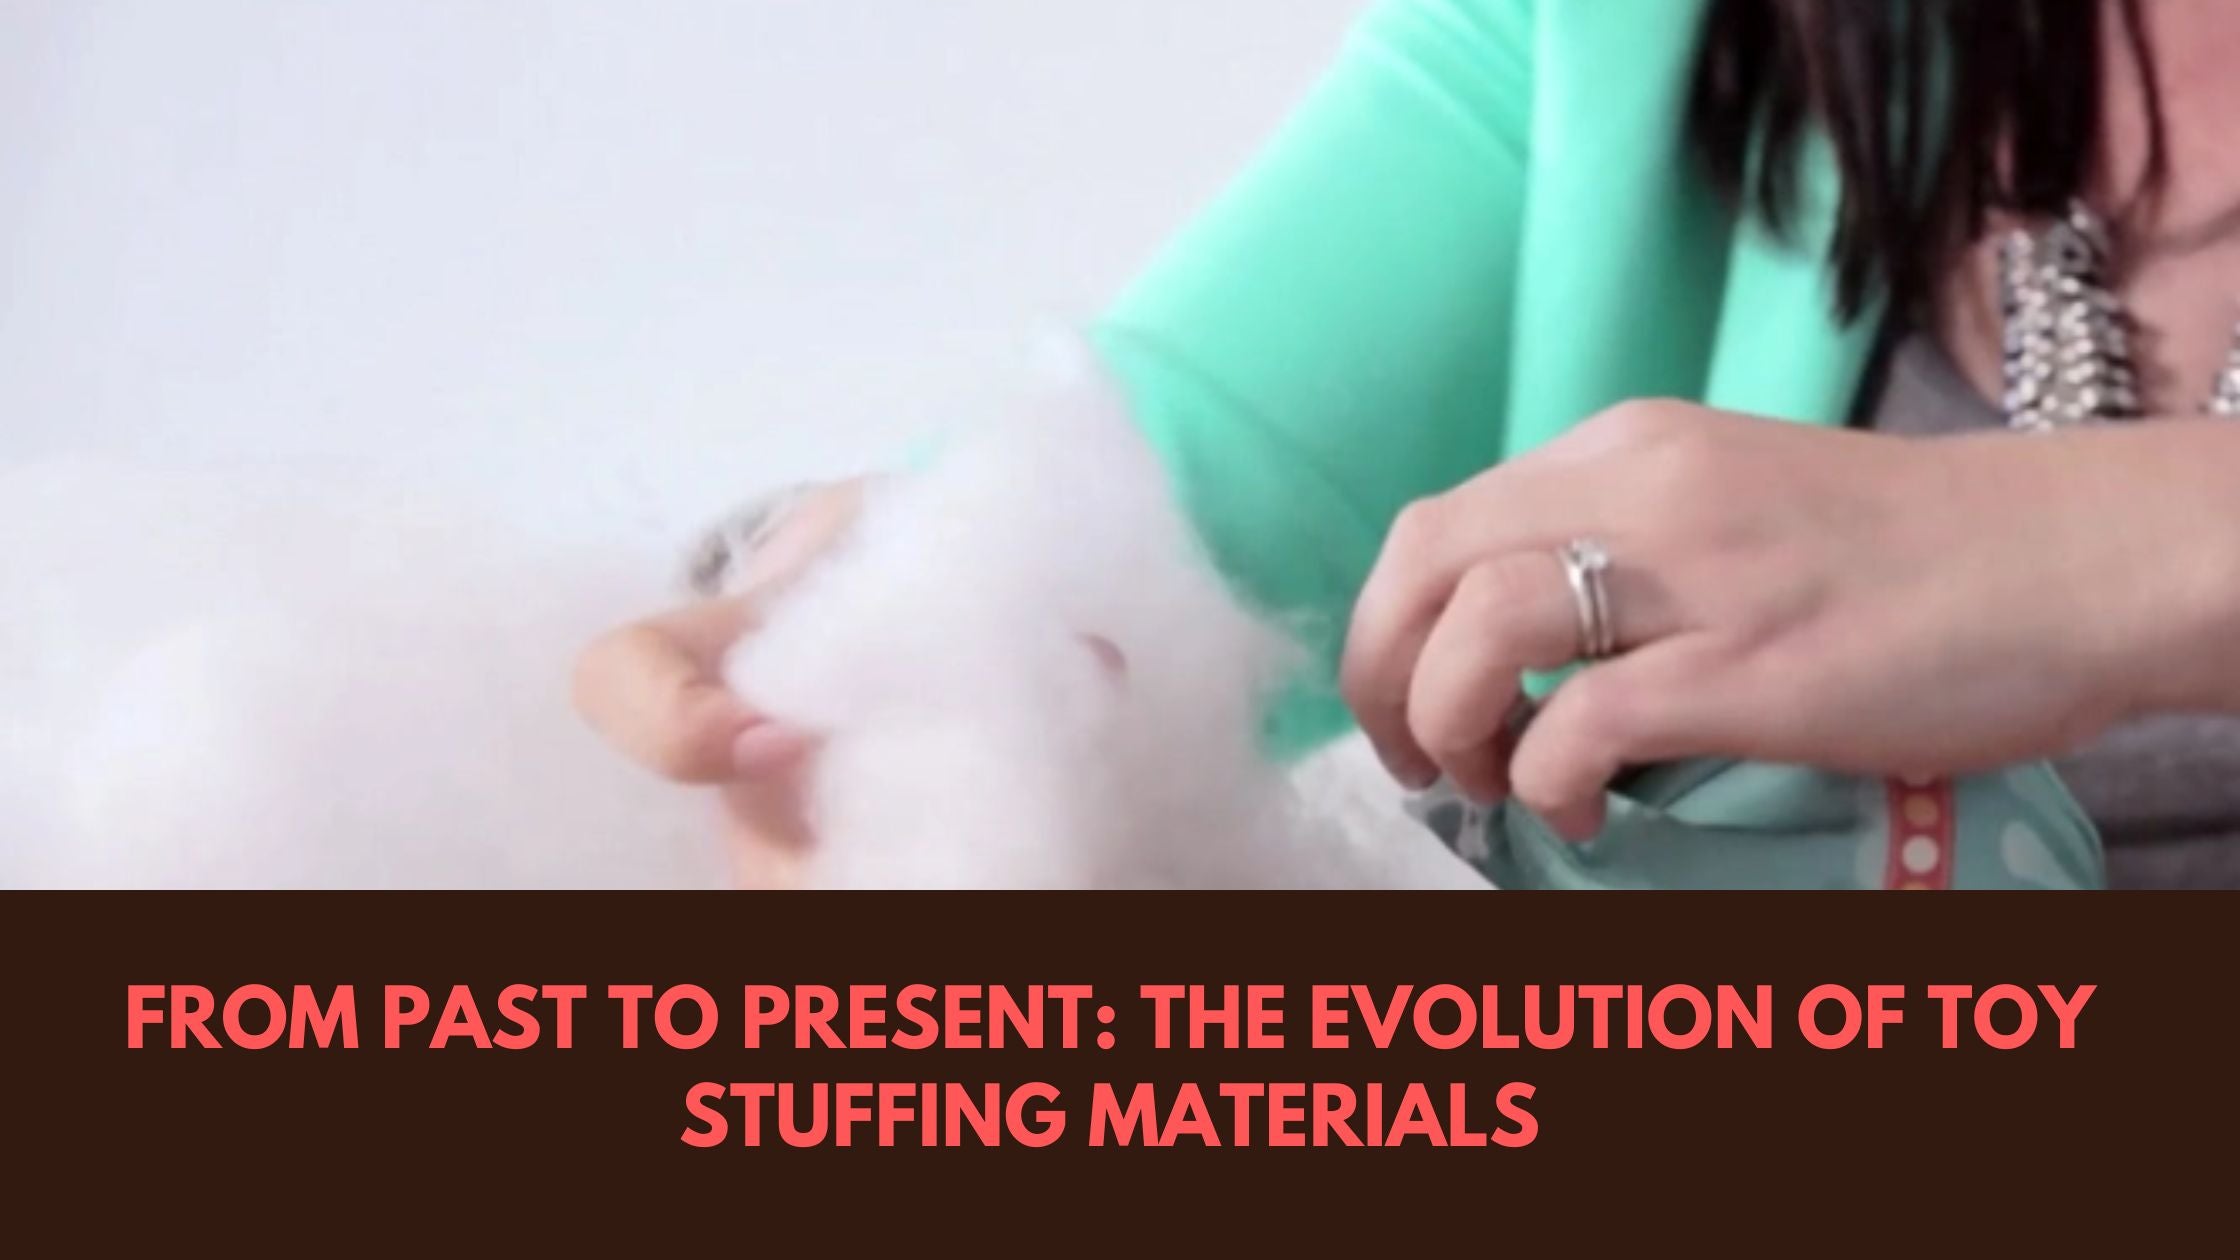 From Past to Present: The Evolution of Toy Stuffing Materials